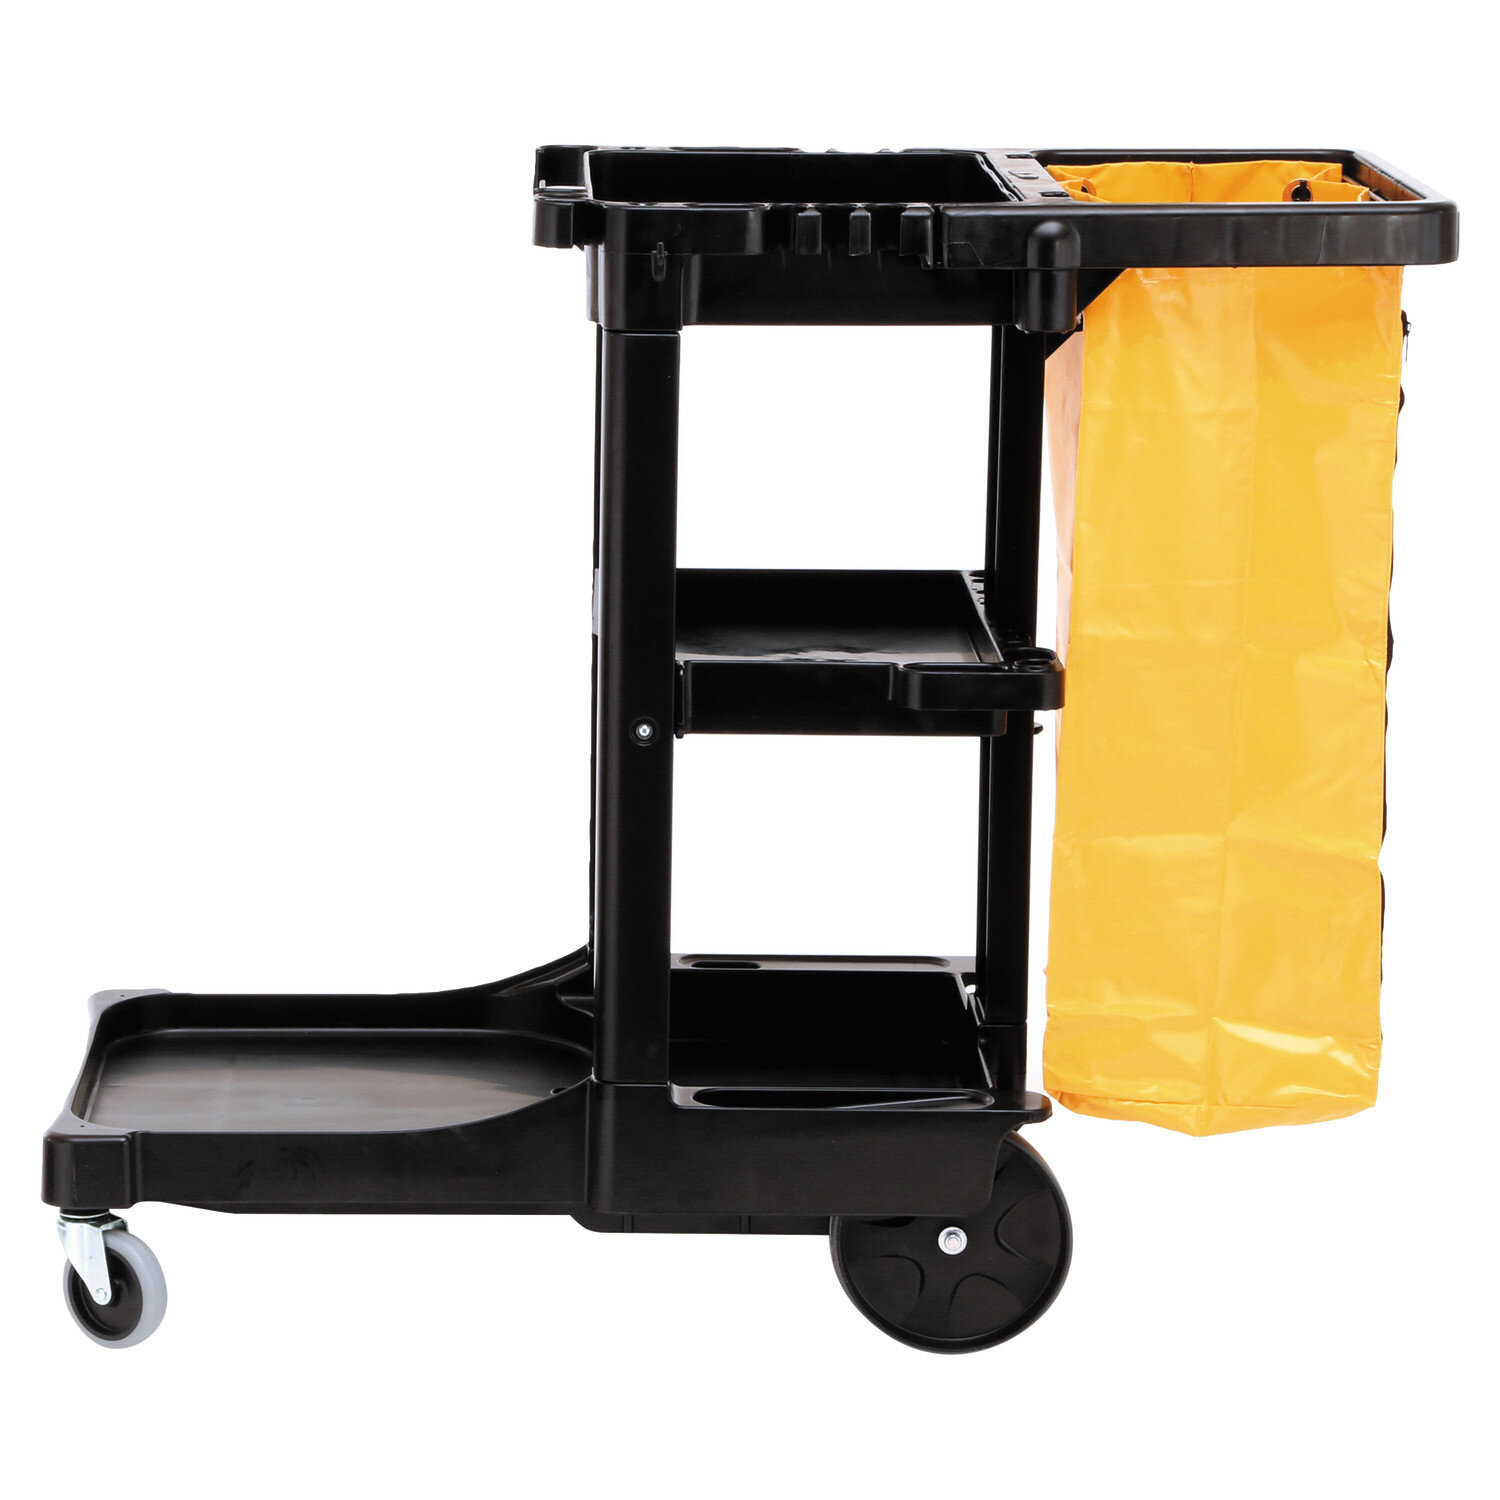 Rubbermaid Commercial Products 34.8'' H x 12.1'' W Utility Cart with Wheels